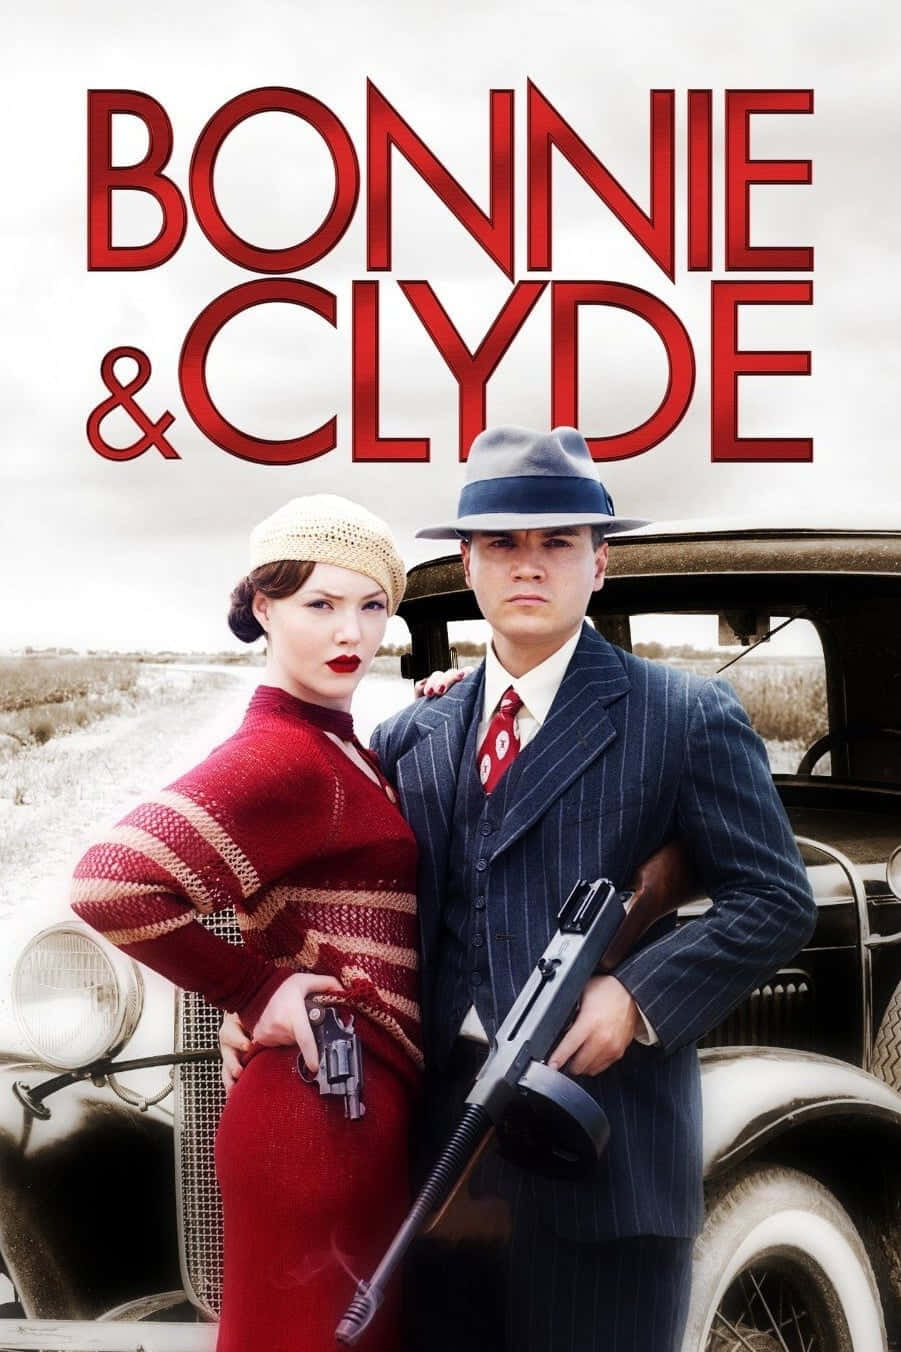 Famous American outlaw couple, Bonnie and Clyde